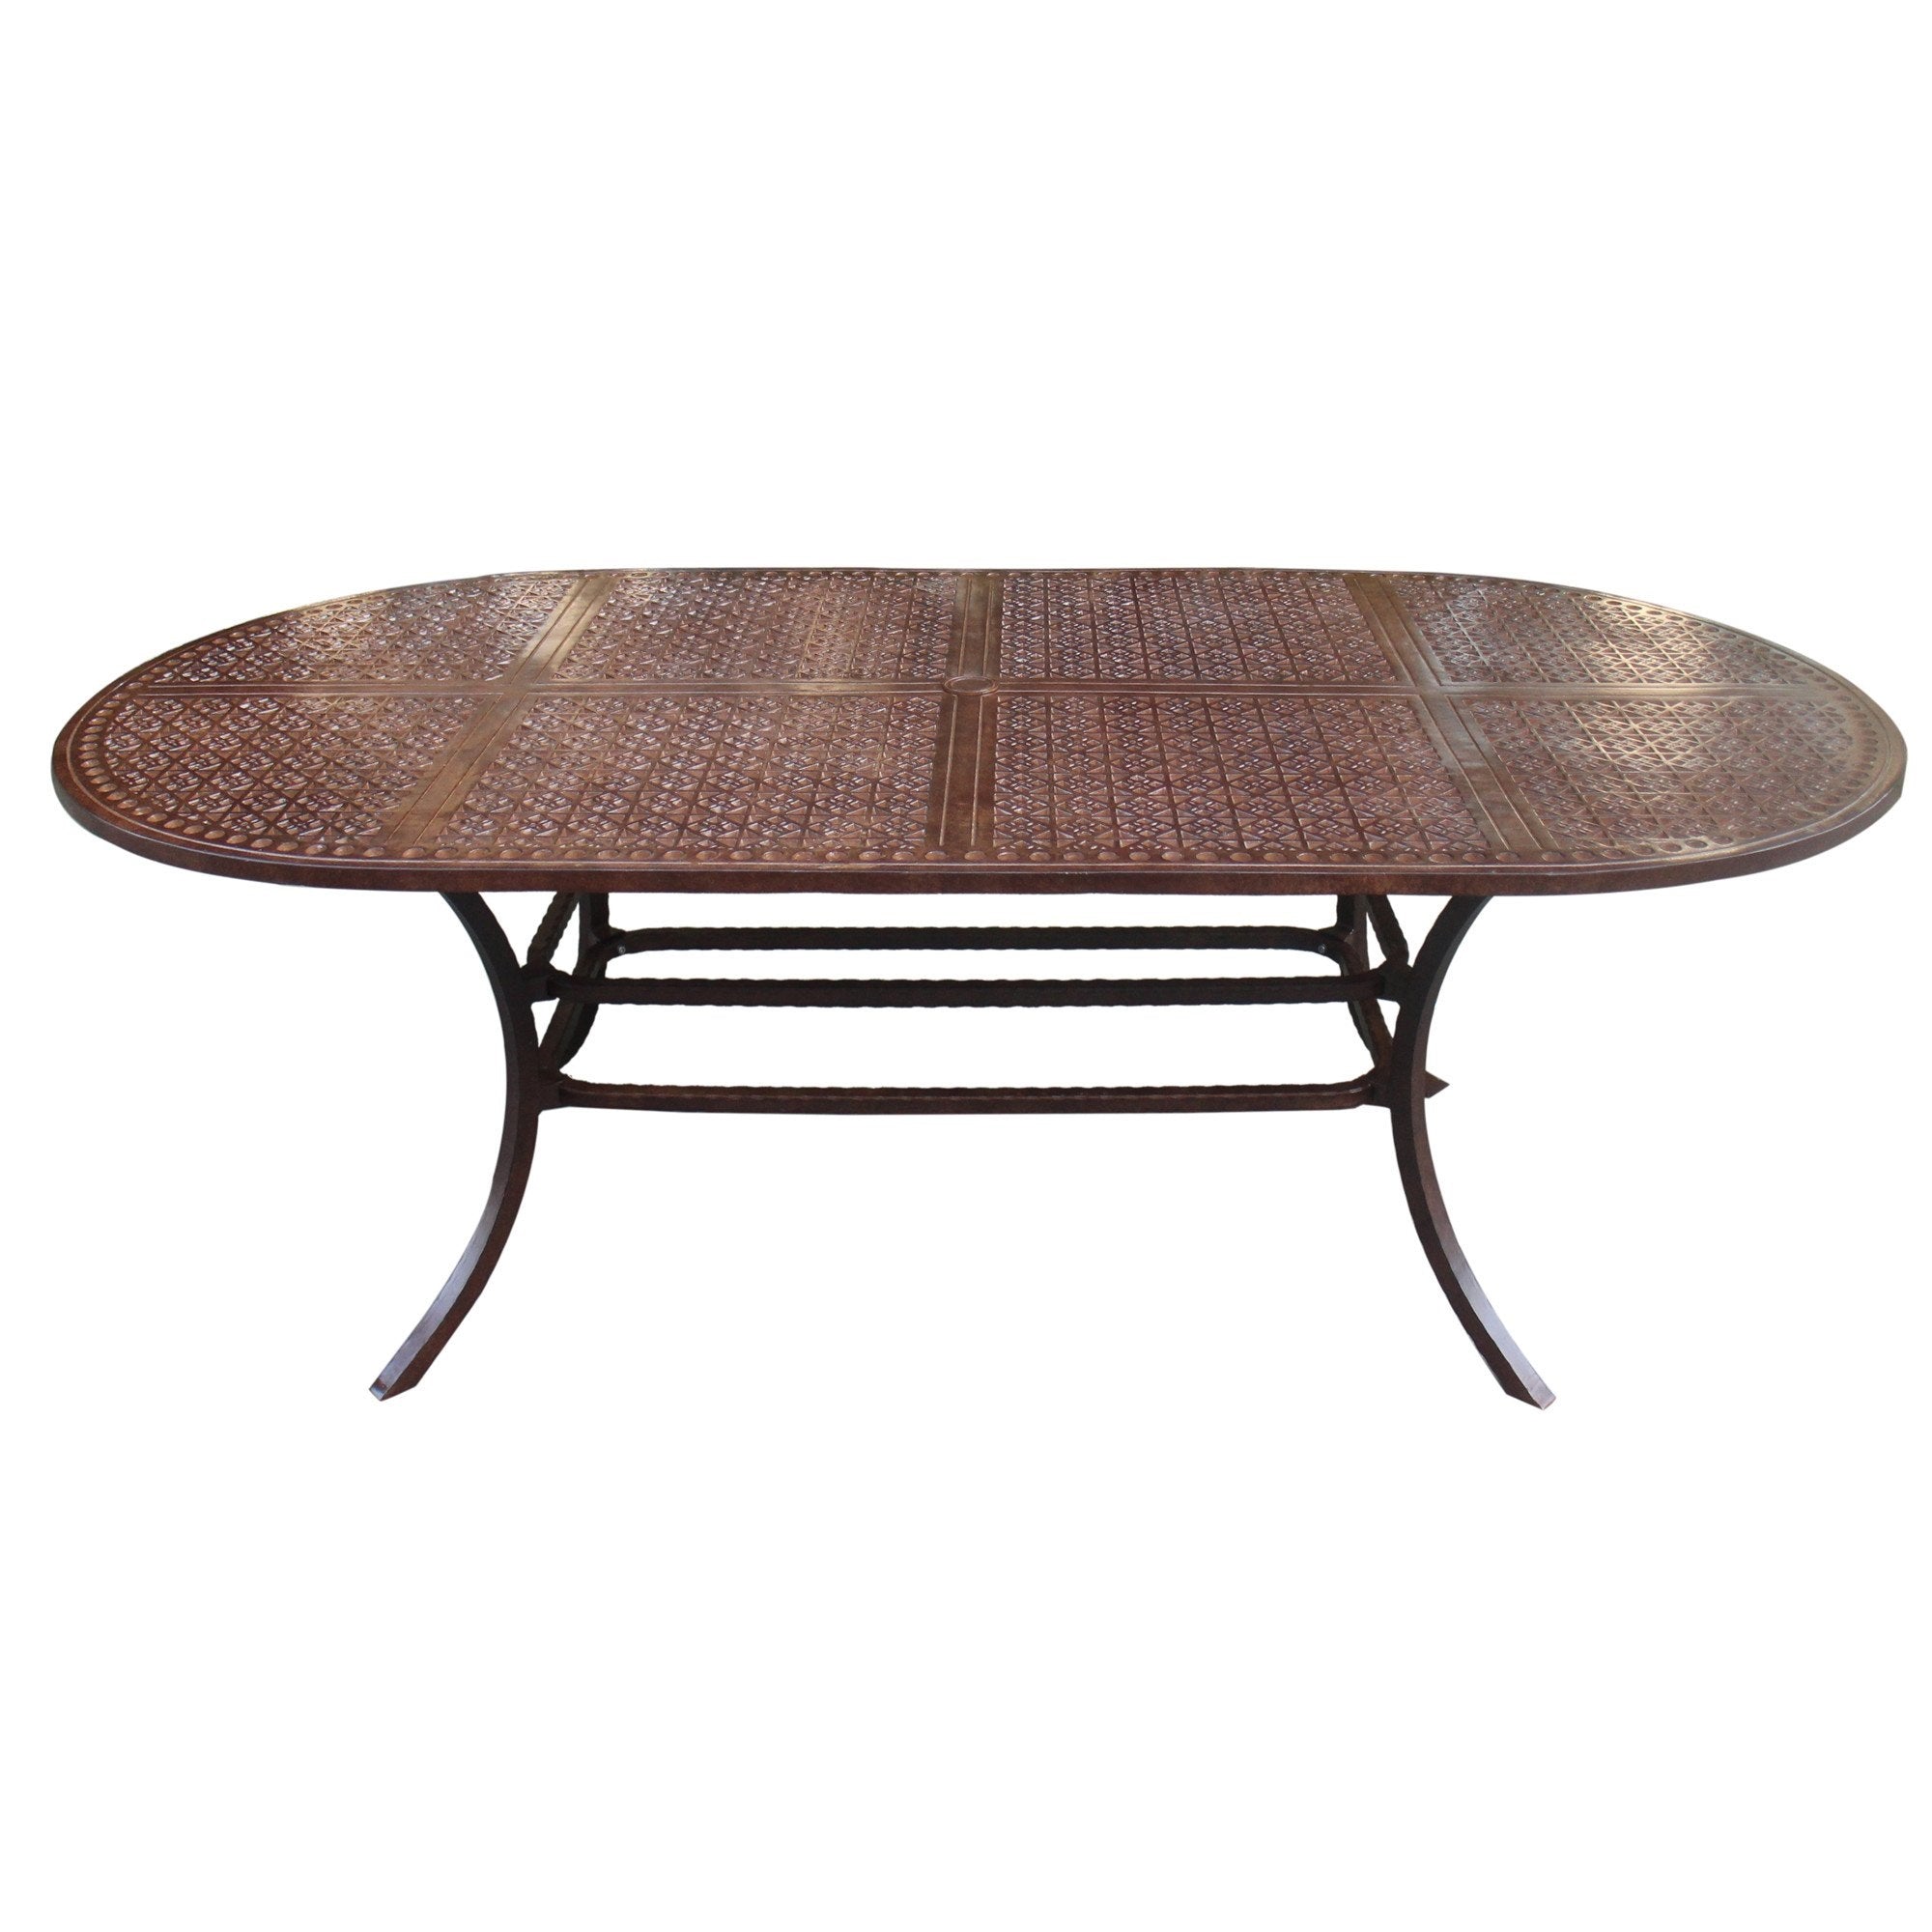 Outdoor Patio Cast Aluminum 42 x 84 Inch Oval Dining Table In Rustic Brown